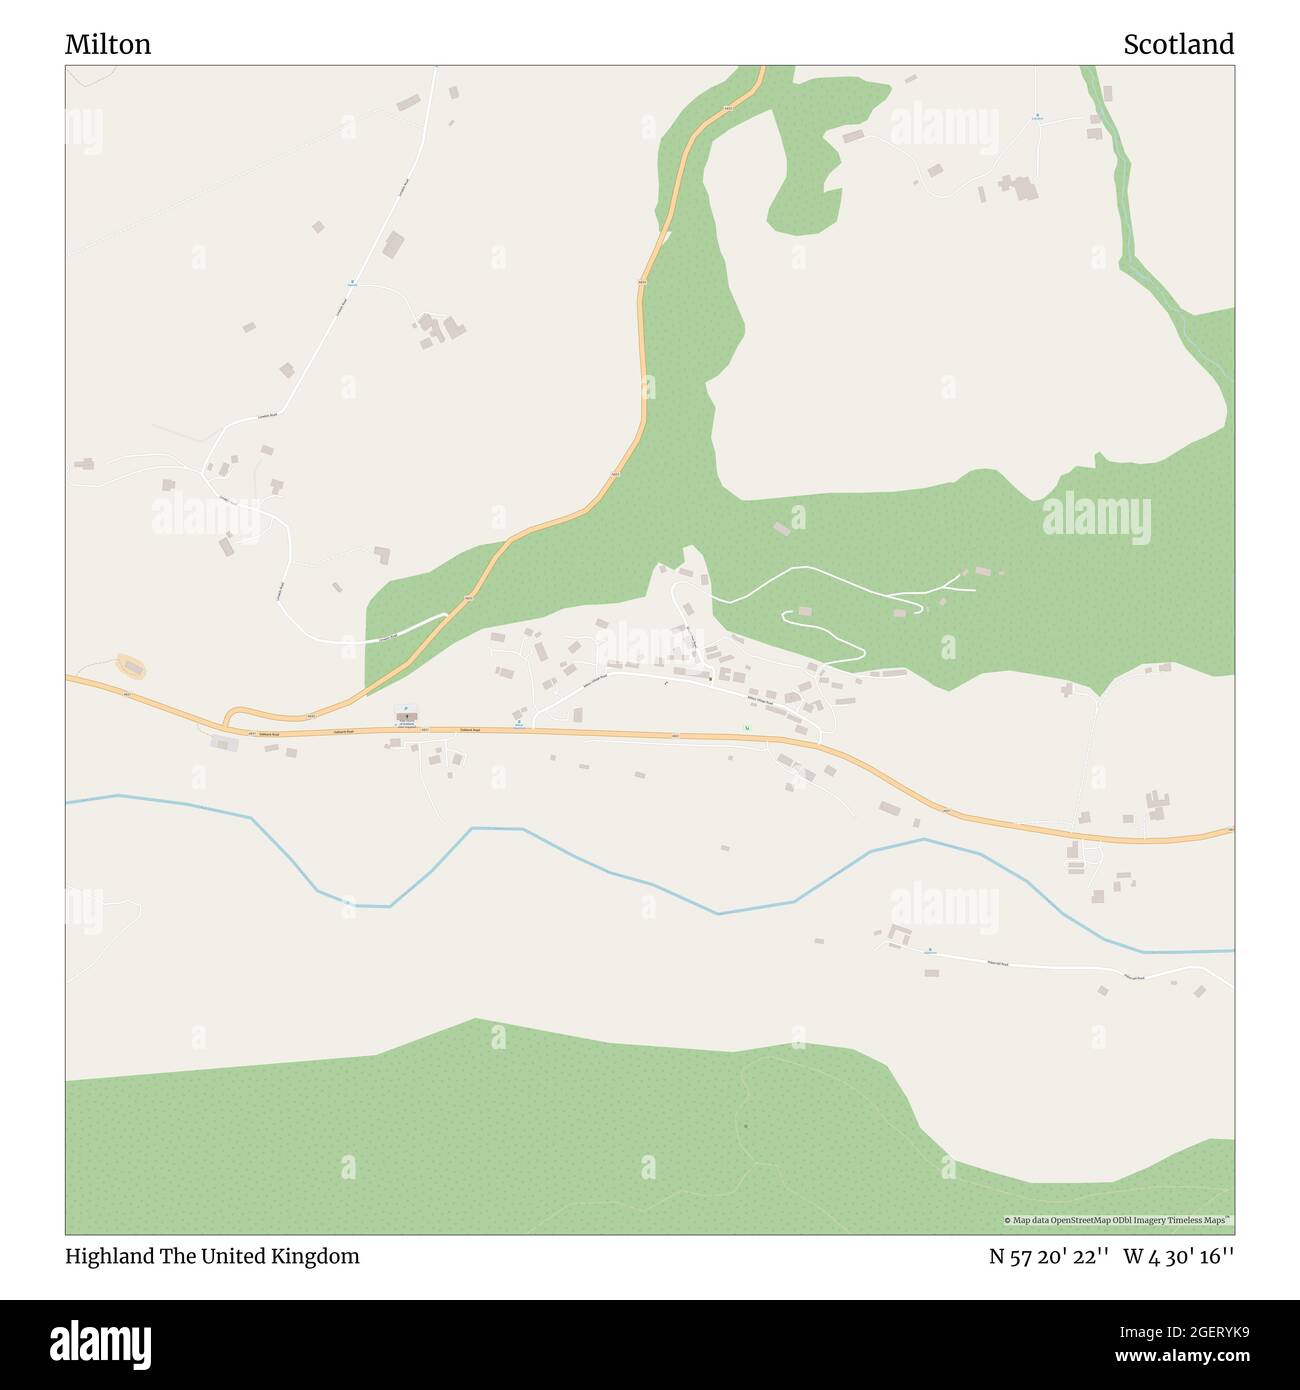 Milton, Highland, United Kingdom, Scotland, N 57 20' 22'', W 4 30' 16'', map, Timeless Map published in 2021. Travelers, explorers and adventurers like Florence Nightingale, David Livingstone, Ernest Shackleton, Lewis and Clark and Sherlock Holmes relied on maps to plan travels to the world's most remote corners, Timeless Maps is mapping most locations on the globe, showing the achievement of great dreams Stock Photo